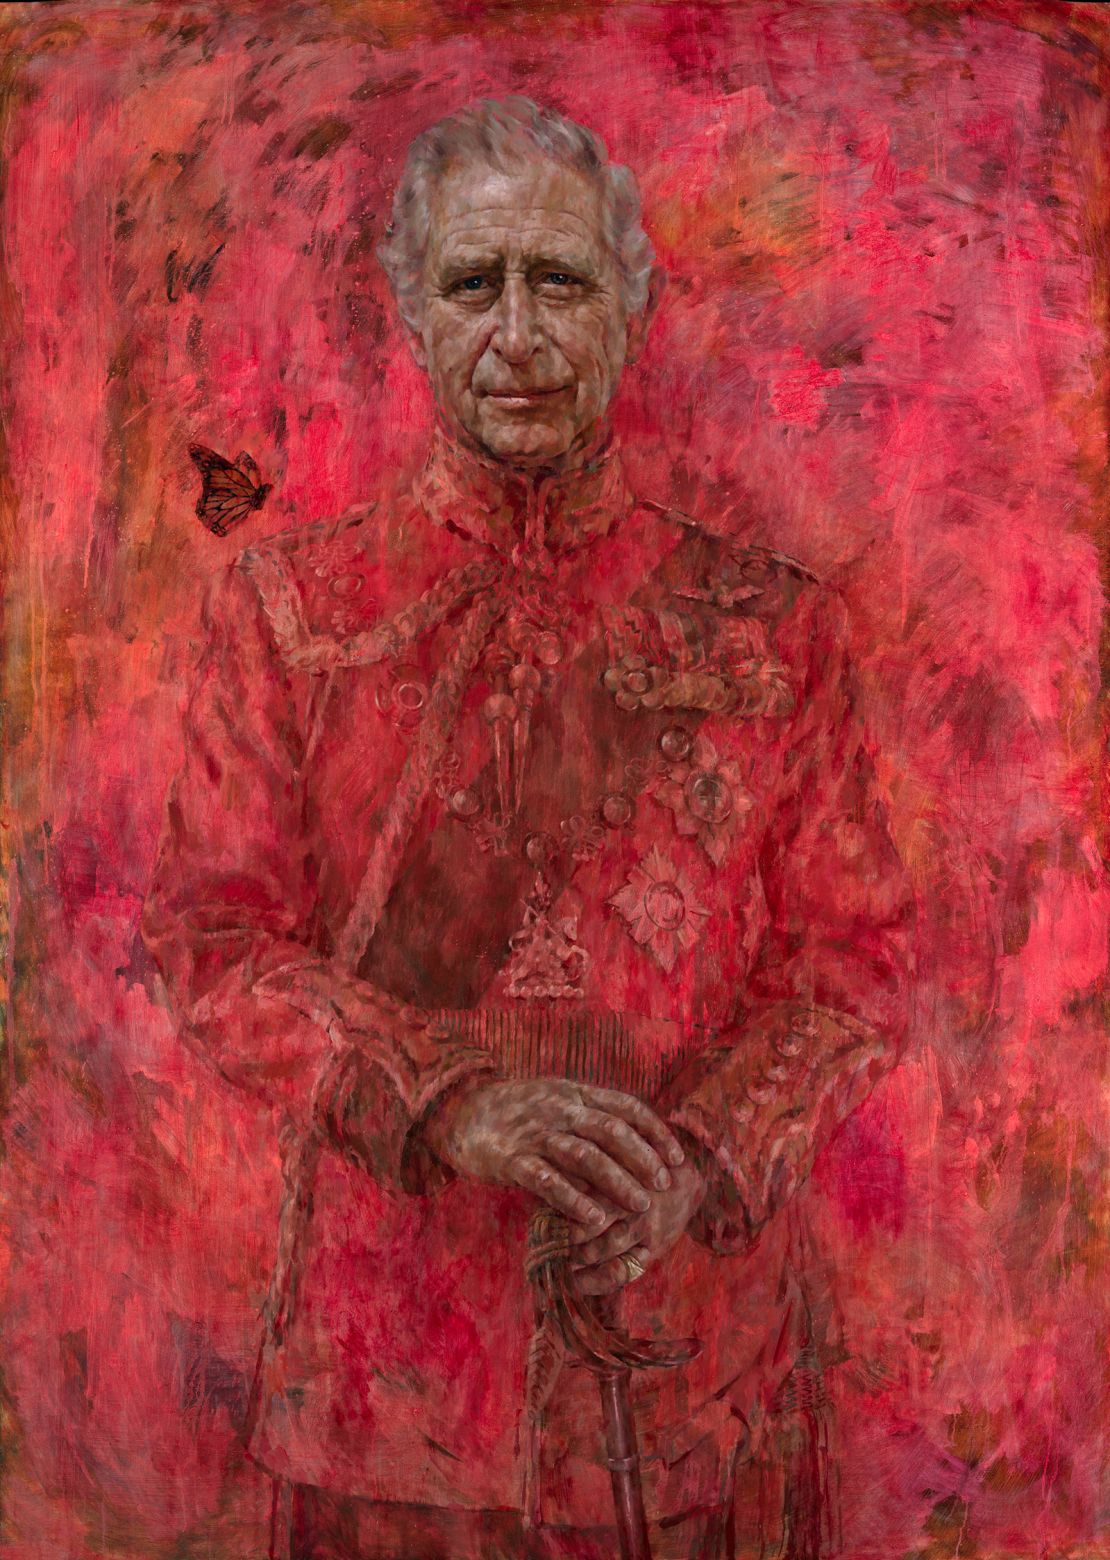 Artist Jonathan Yeo's oil on canvas portrait of Britain's King Charles III. The portrait was commissioned in 2020 to celebrate the then Prince of Wales's 50 years as a member of The Drapers' Company in 2022.